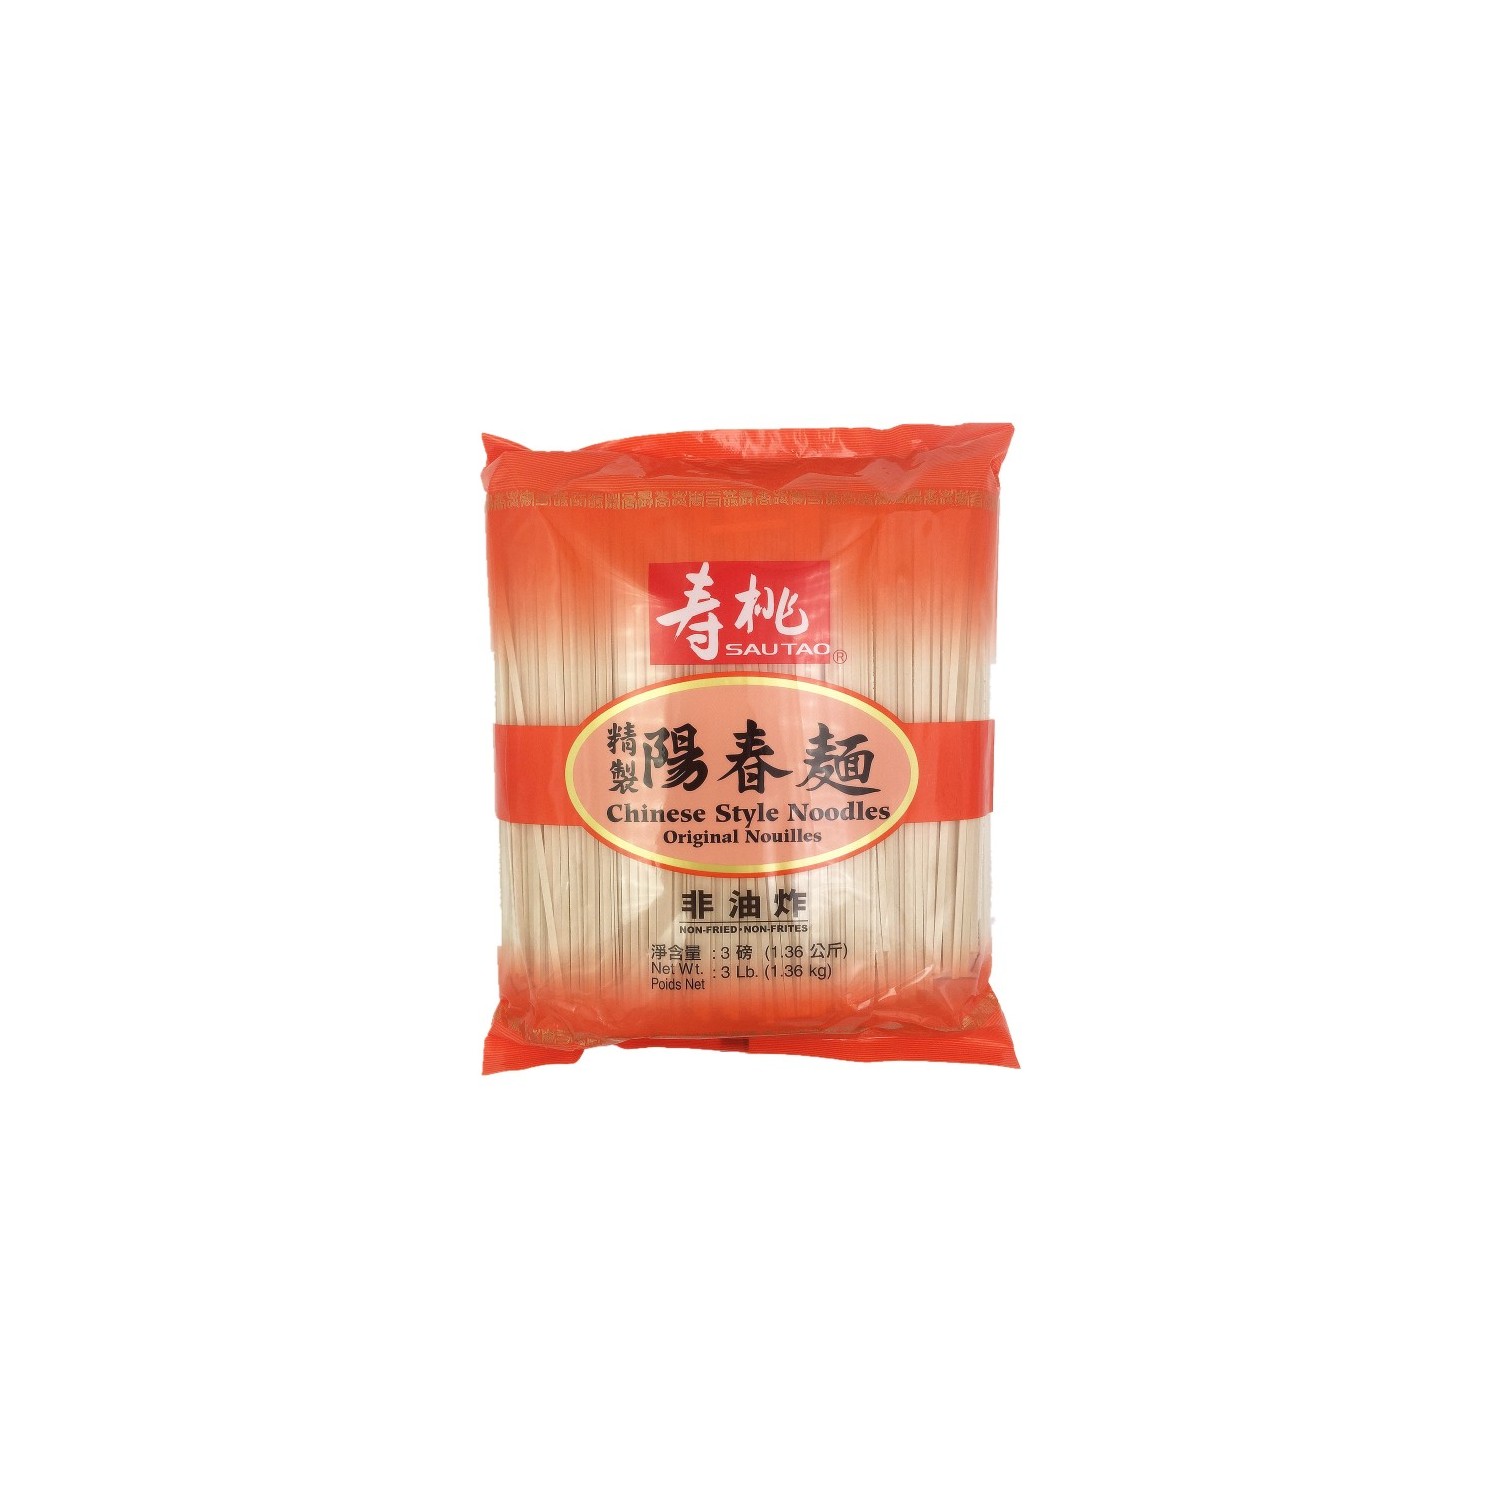 Chinese noodles - 0087303857784